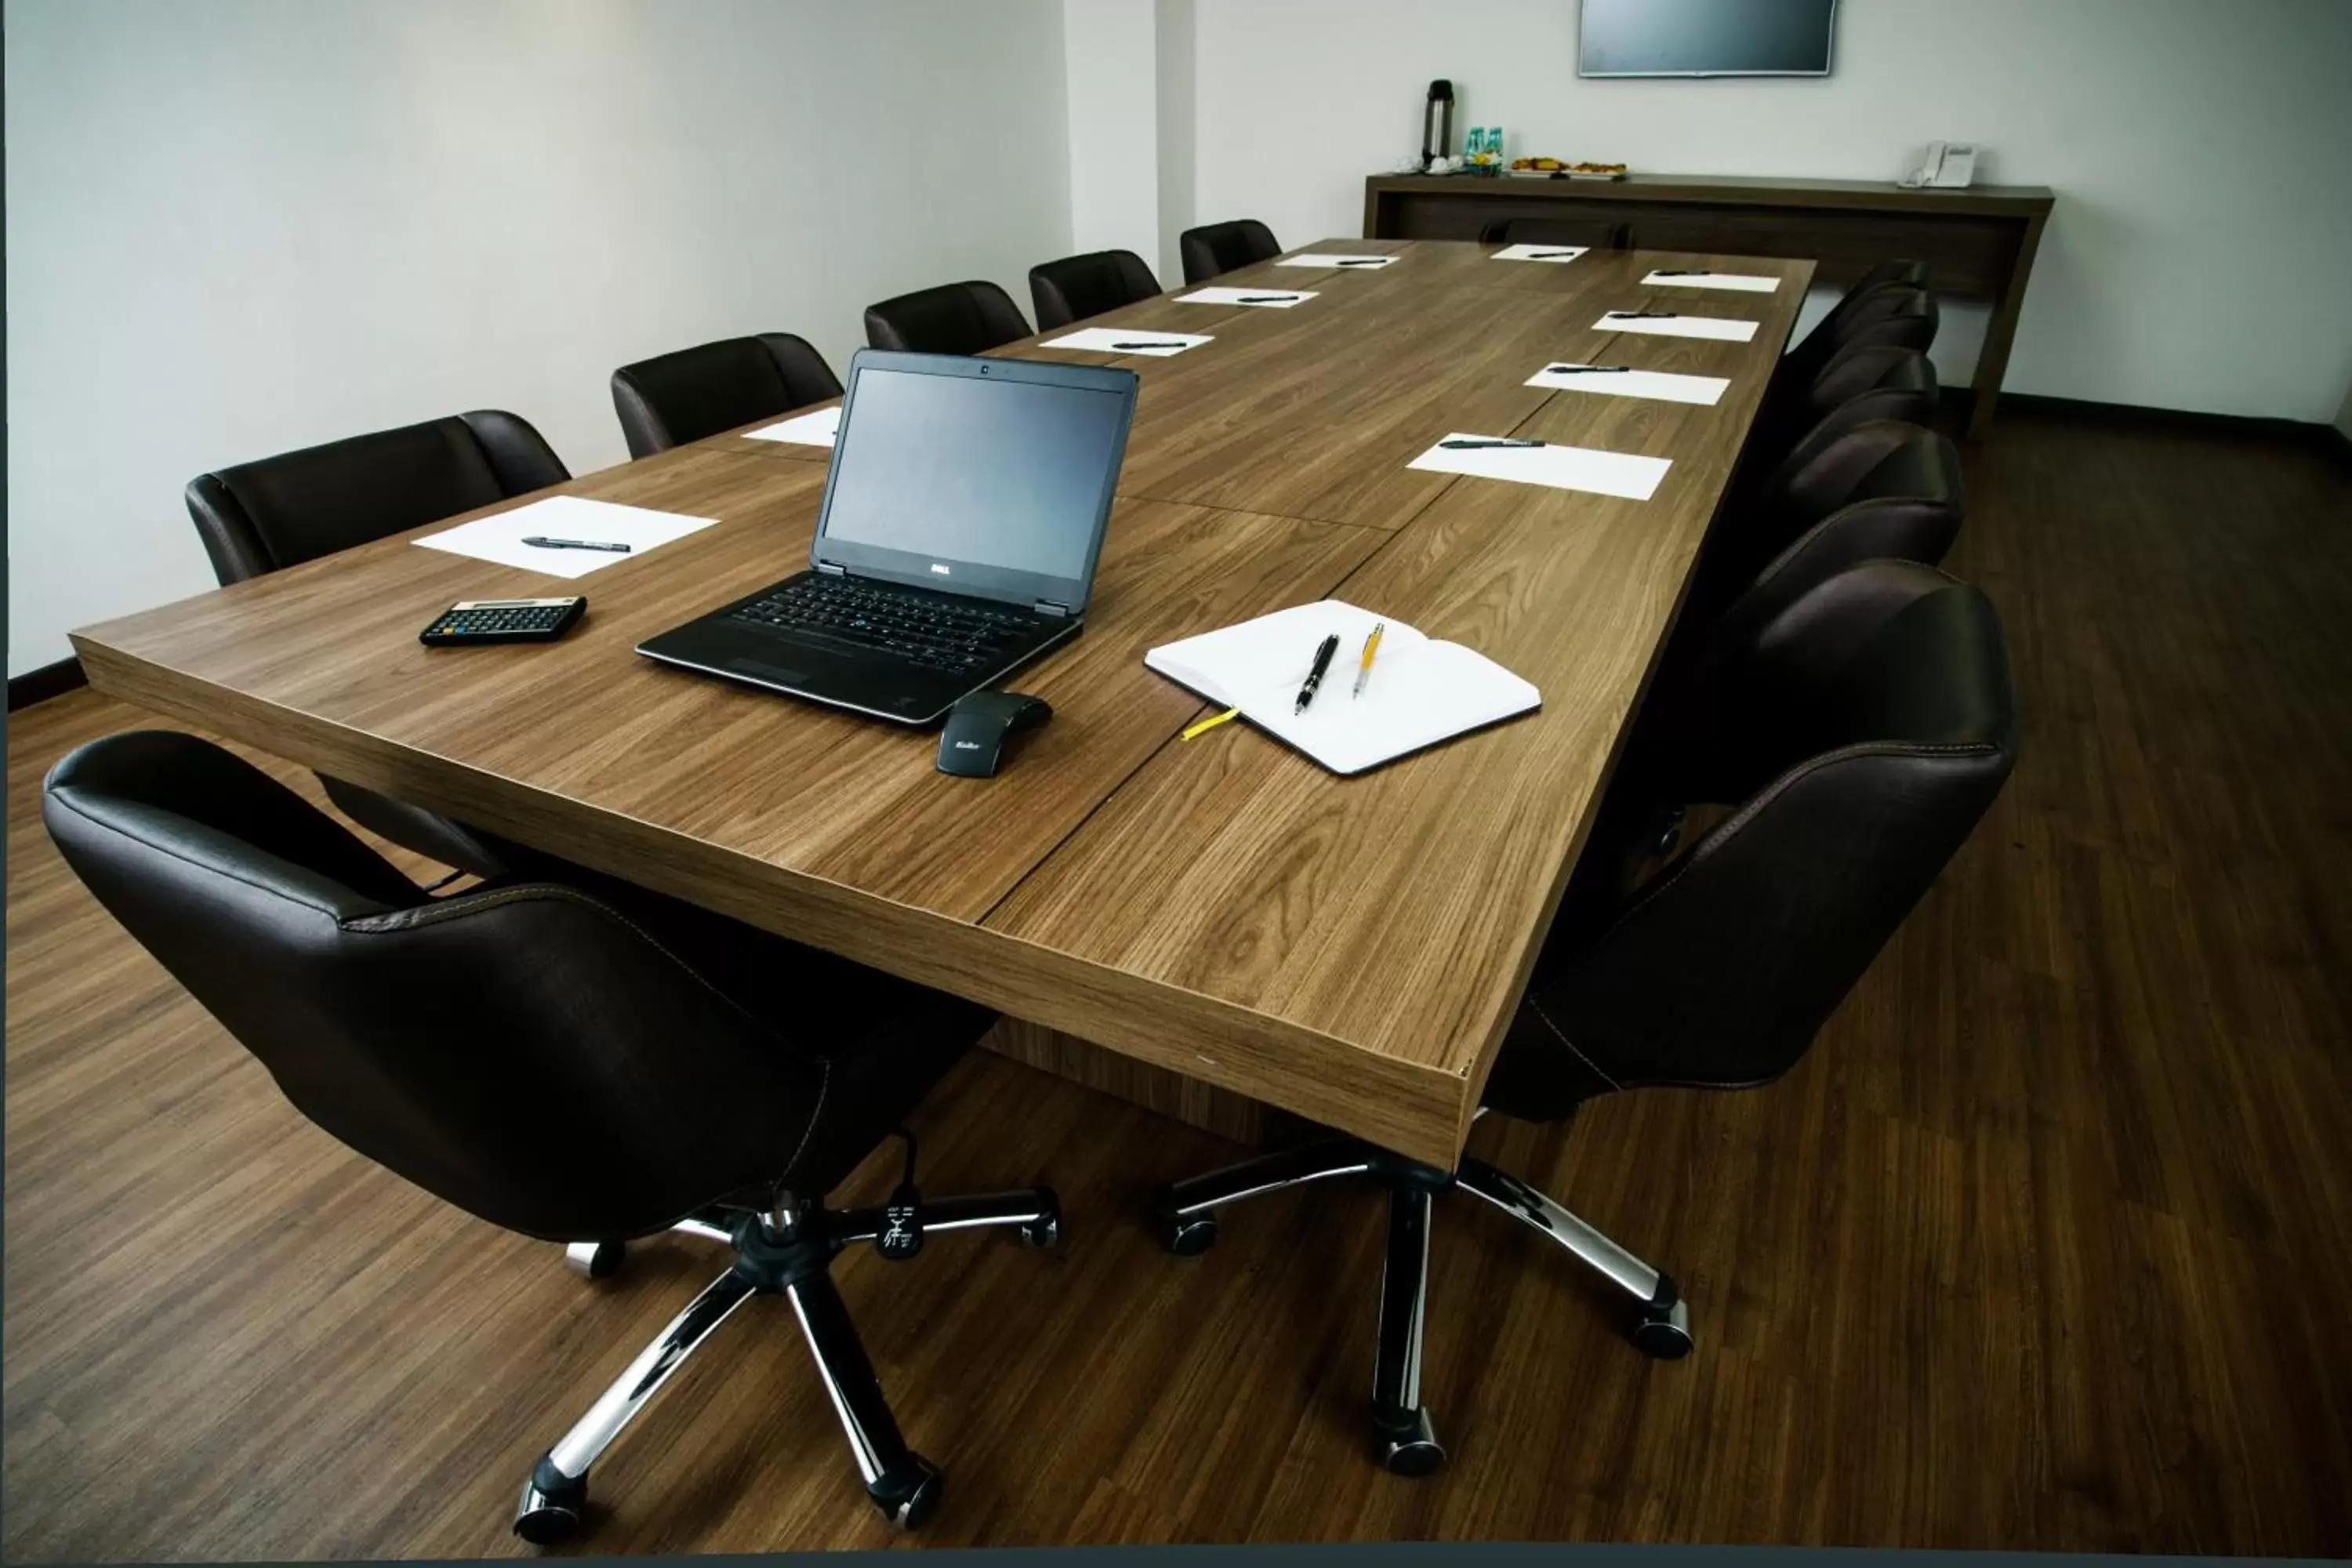 Meeting/conference room in BH Raja Hotel